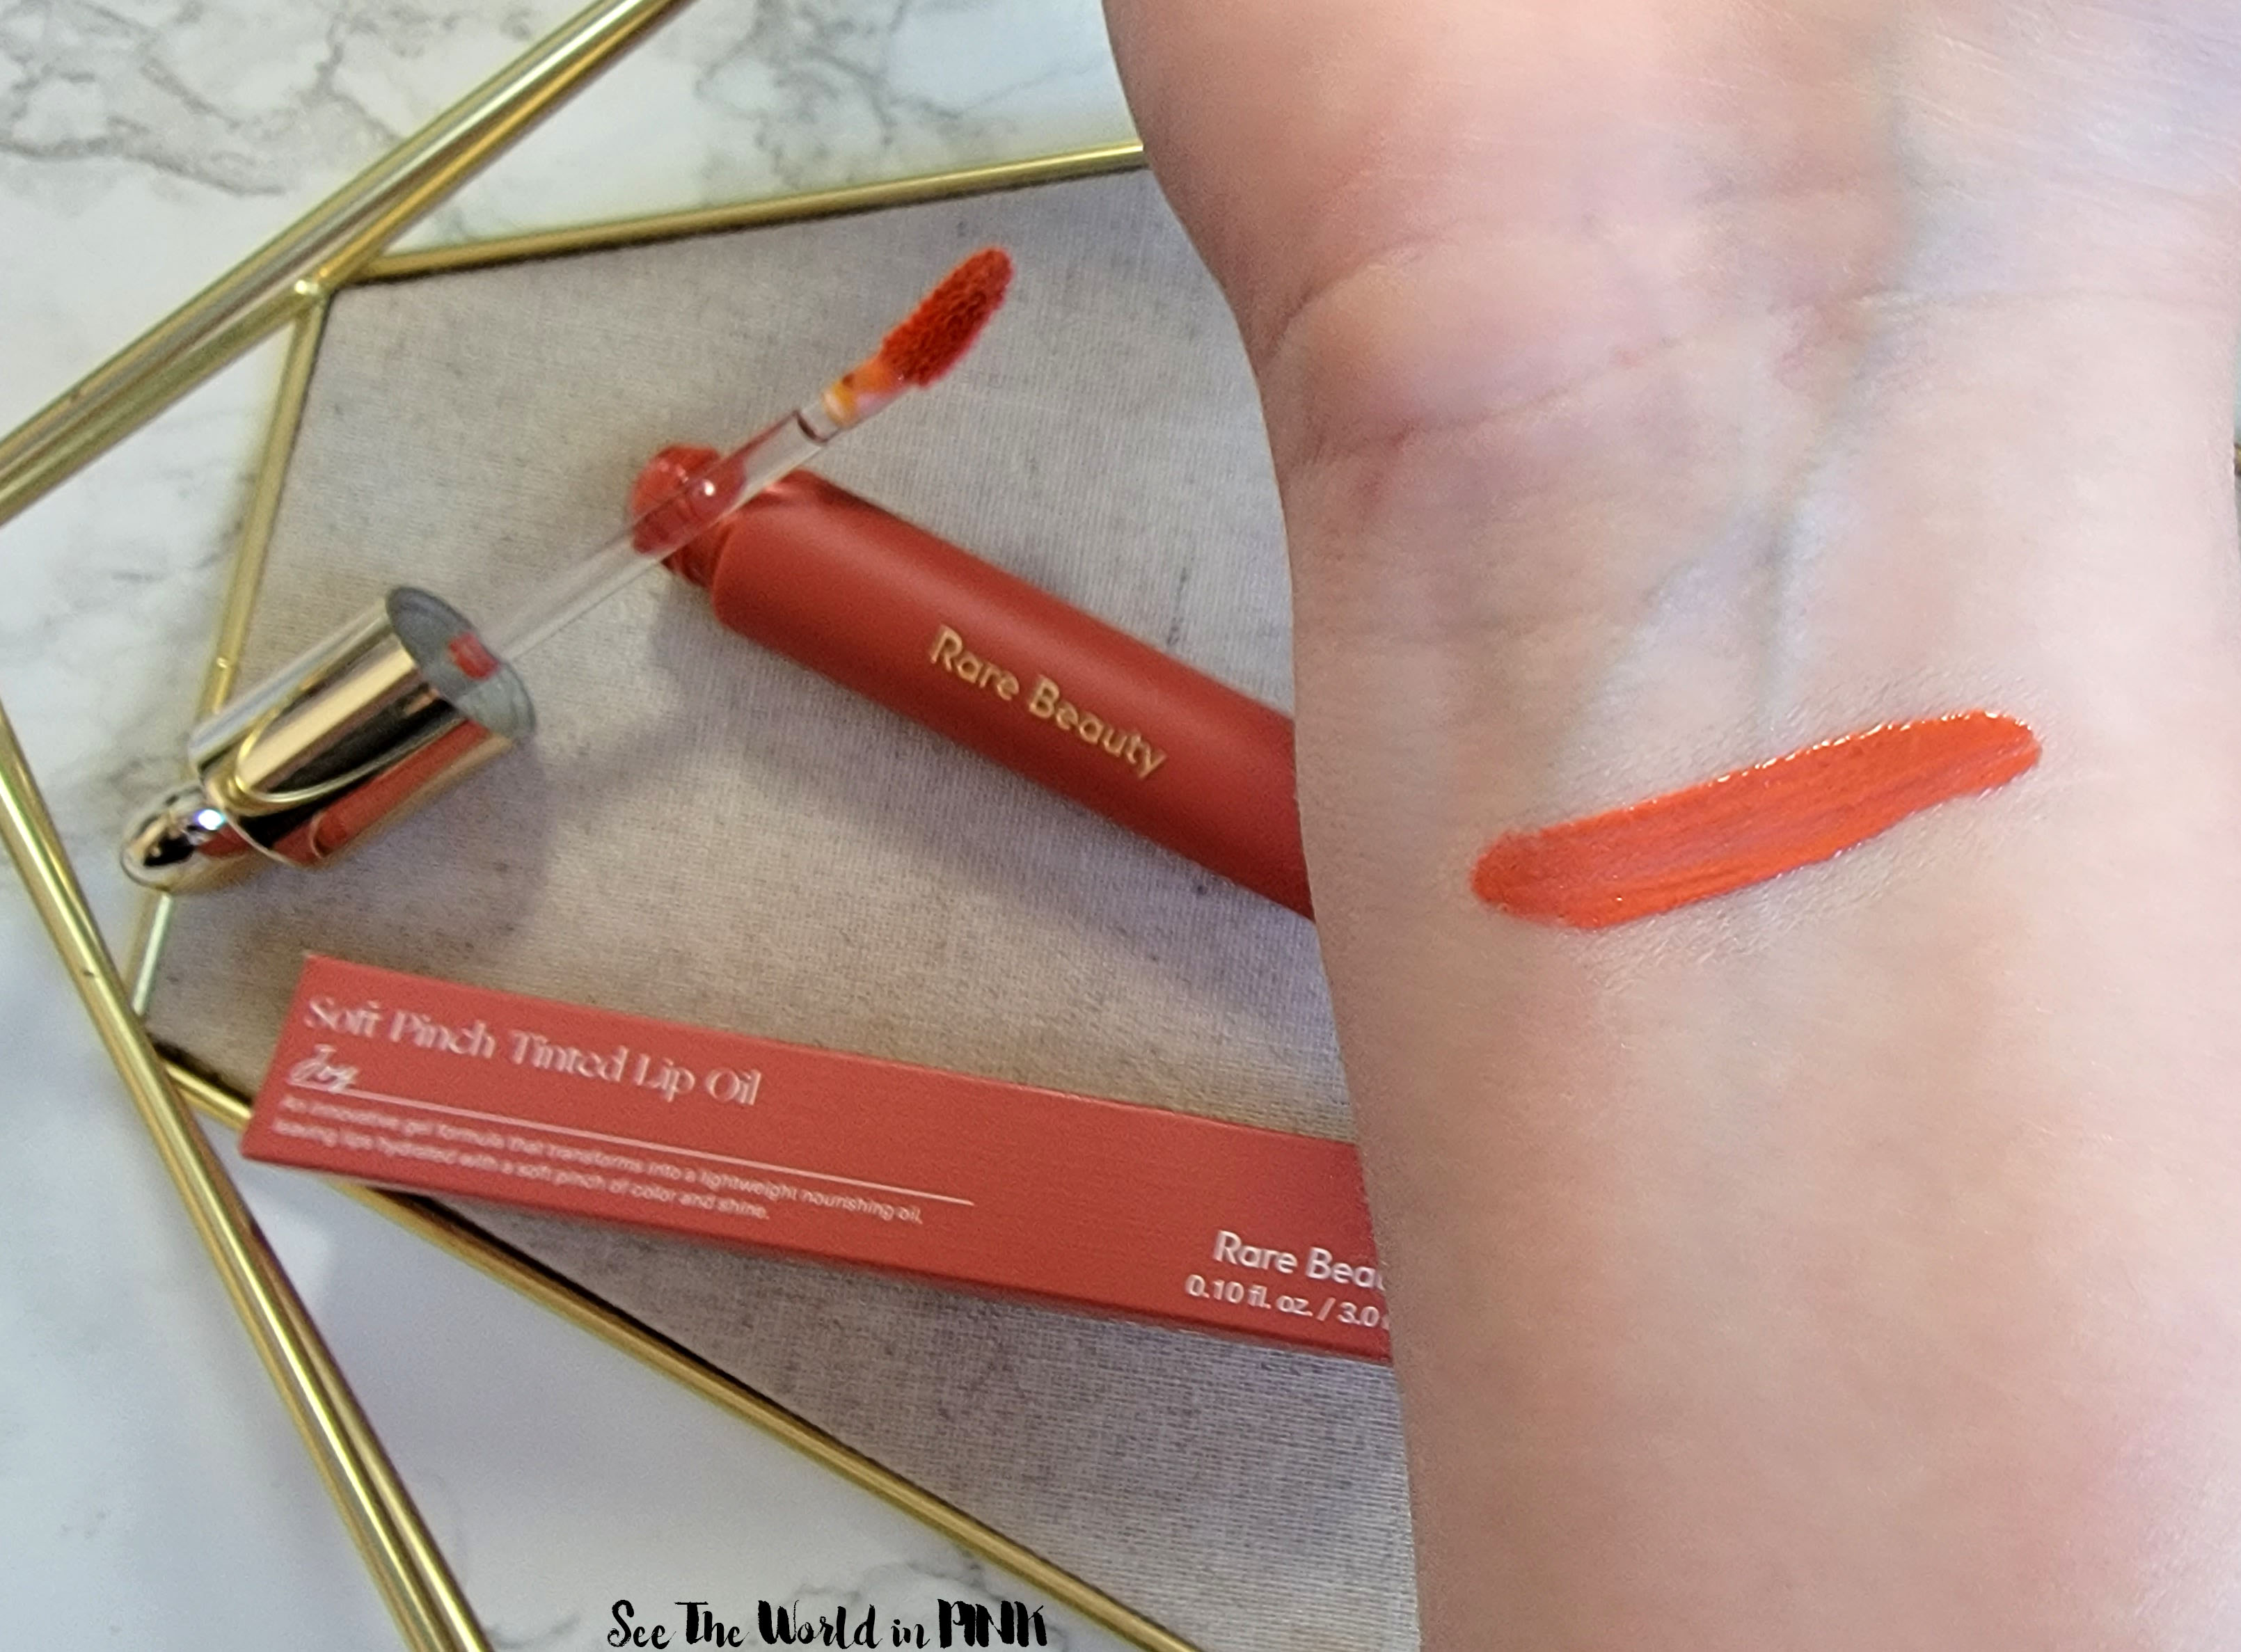 Rare Beauty Soft Pinch Tinted Lip Oil in Joy - Try-on and Review